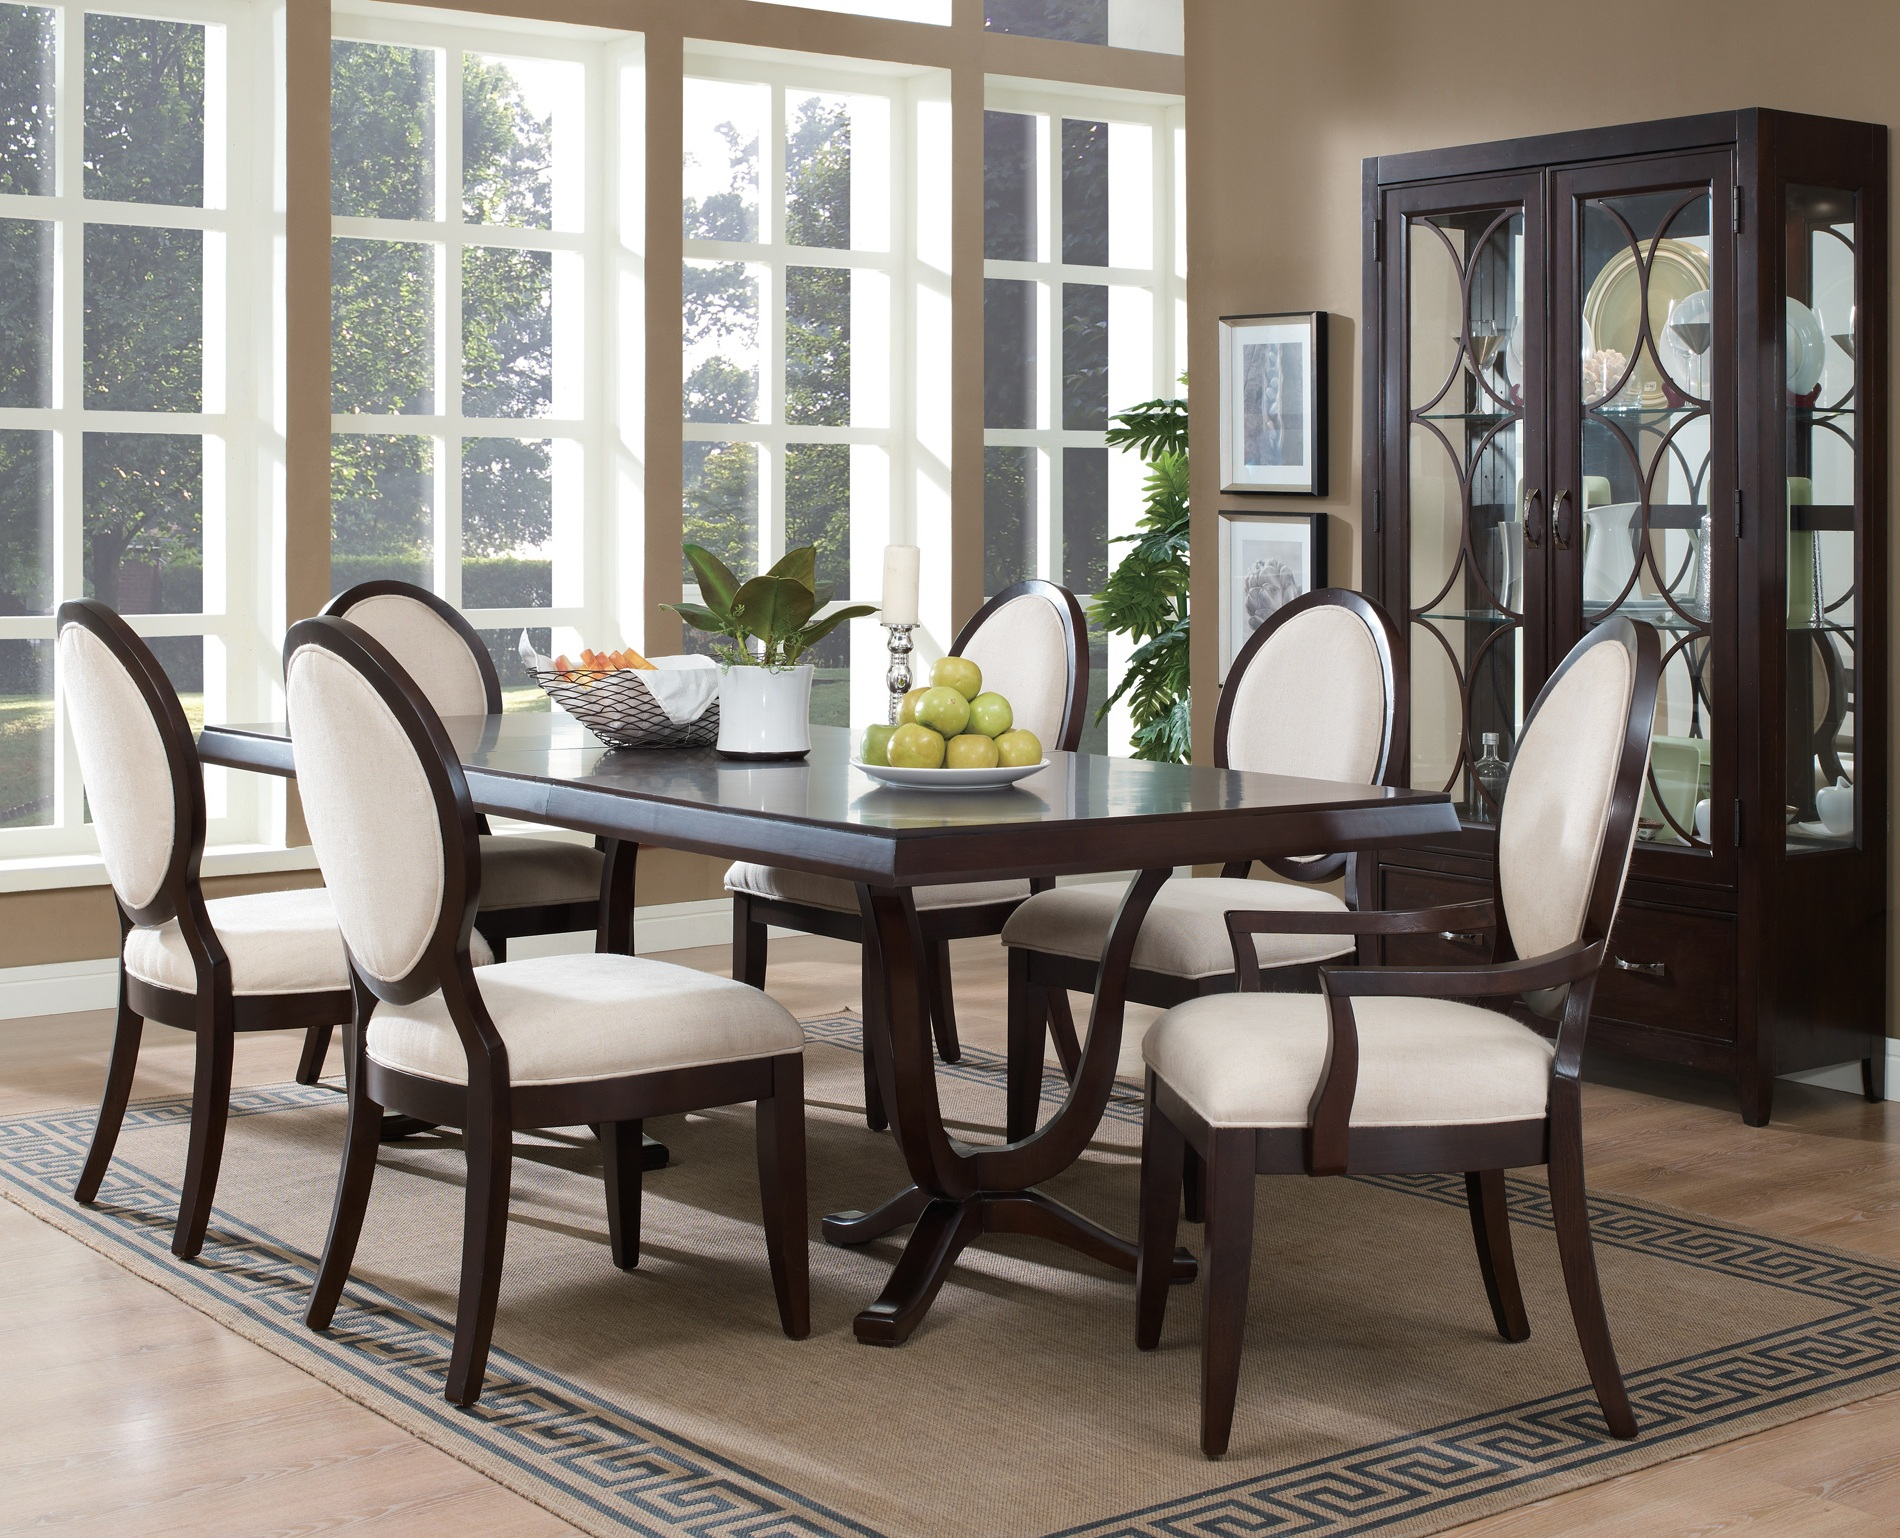 Modern Dining Room Tables South Africa Latest Home Decor within proportions 1900 X 1538